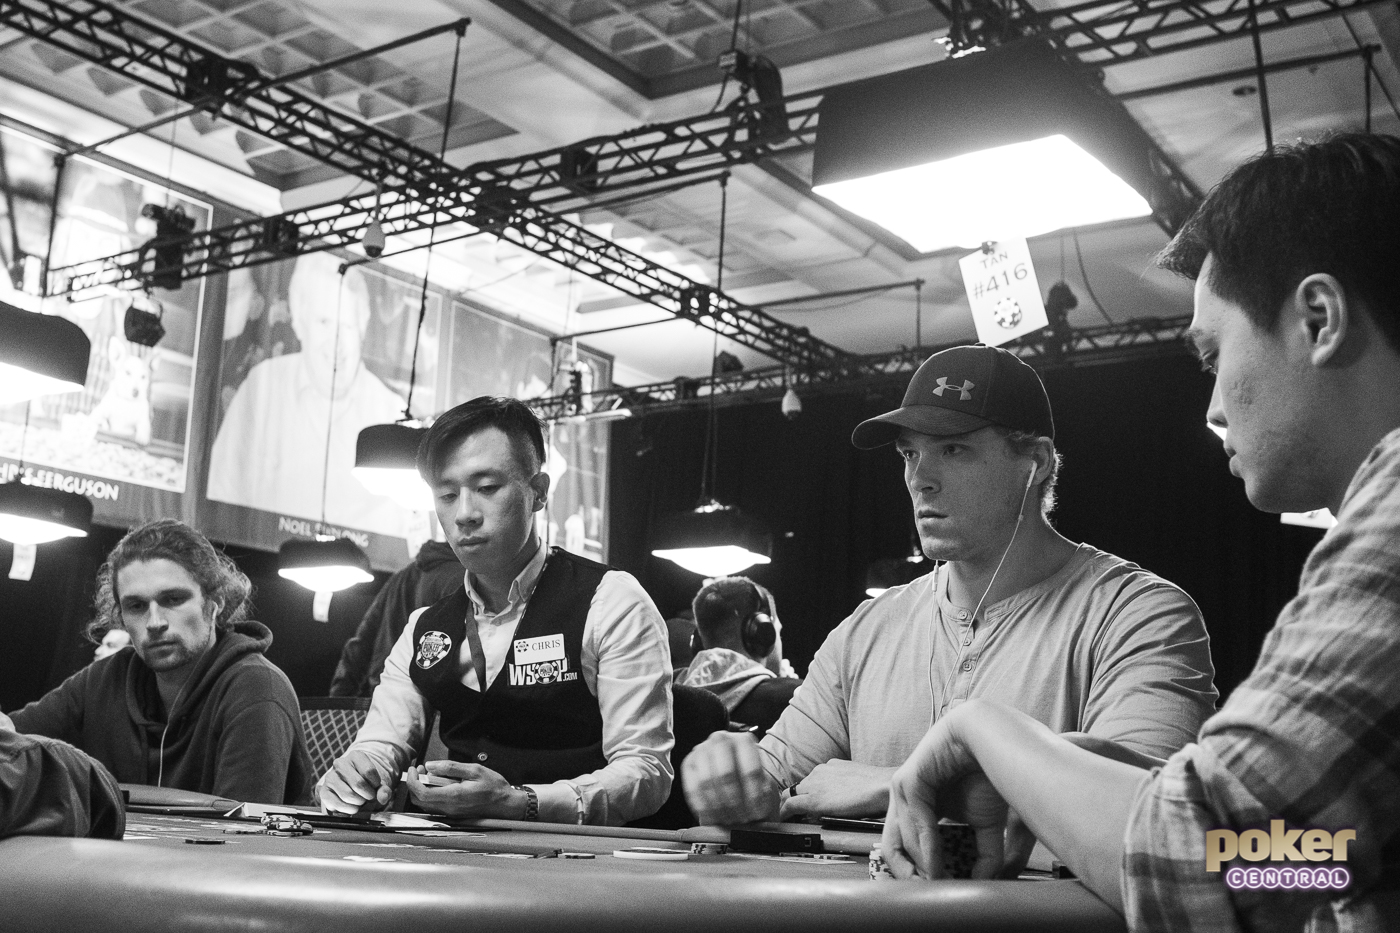 In position versus Ben Heath, Alex Foxen looks focused during Day 1 of the $50,000 High Roller at the WSOP.